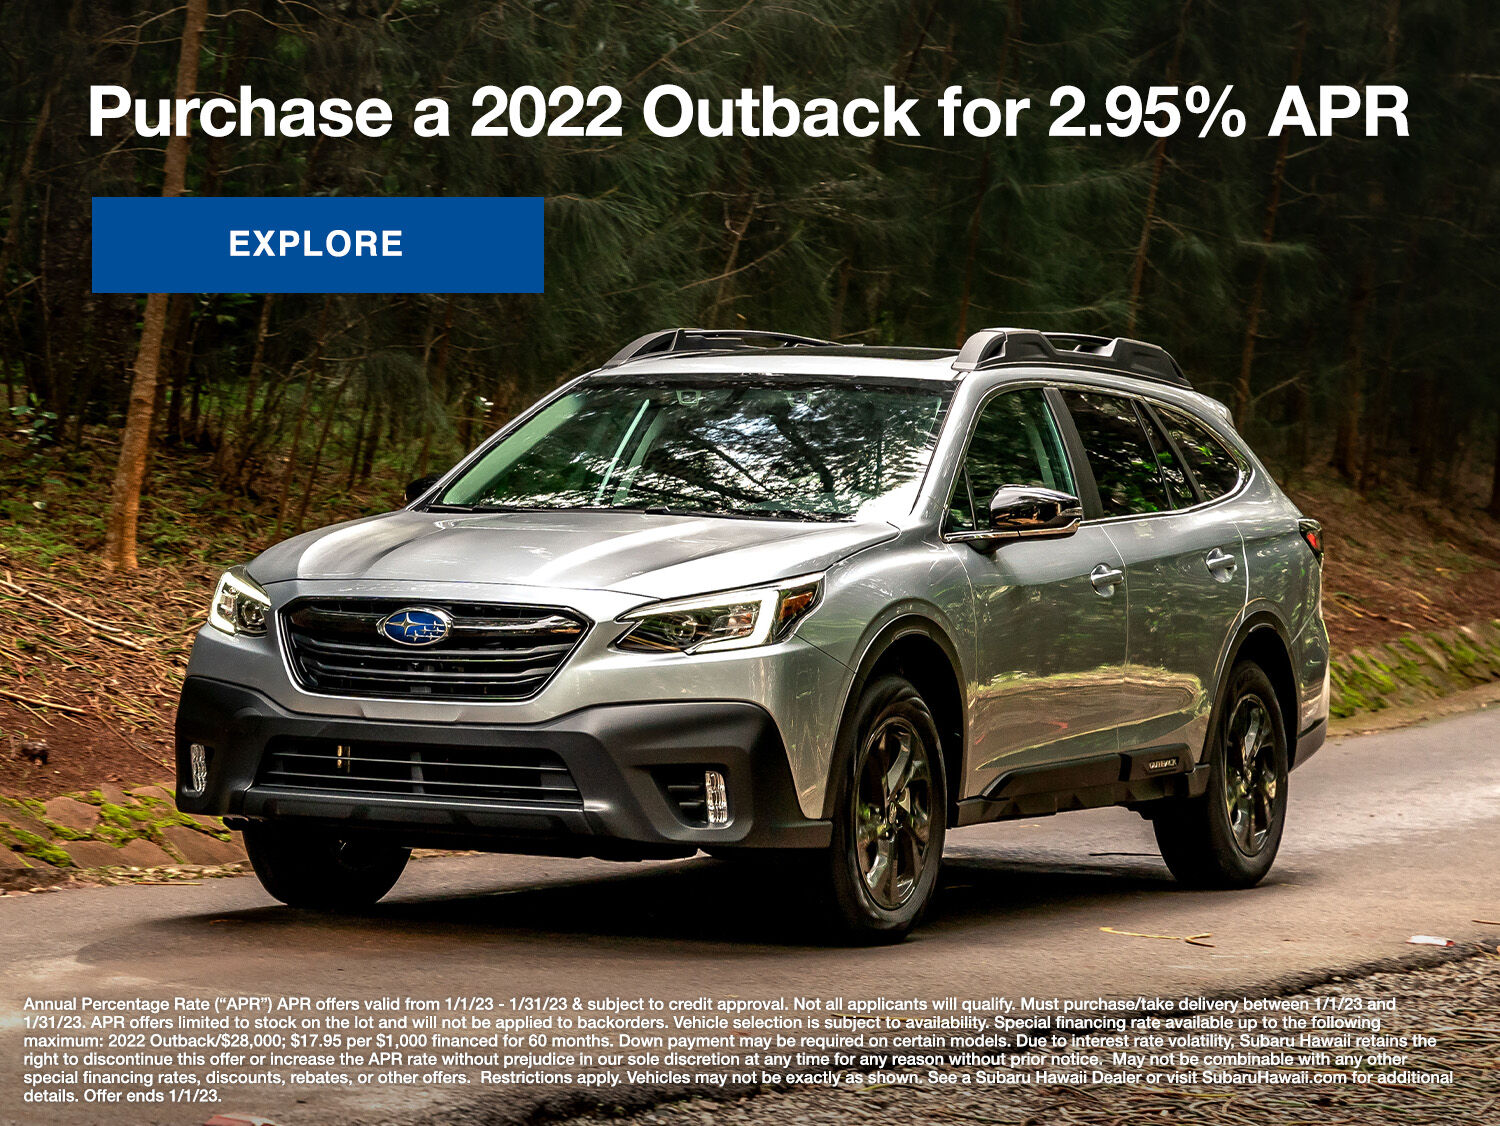 Purchase a 2022 Outback for 2.95% APR